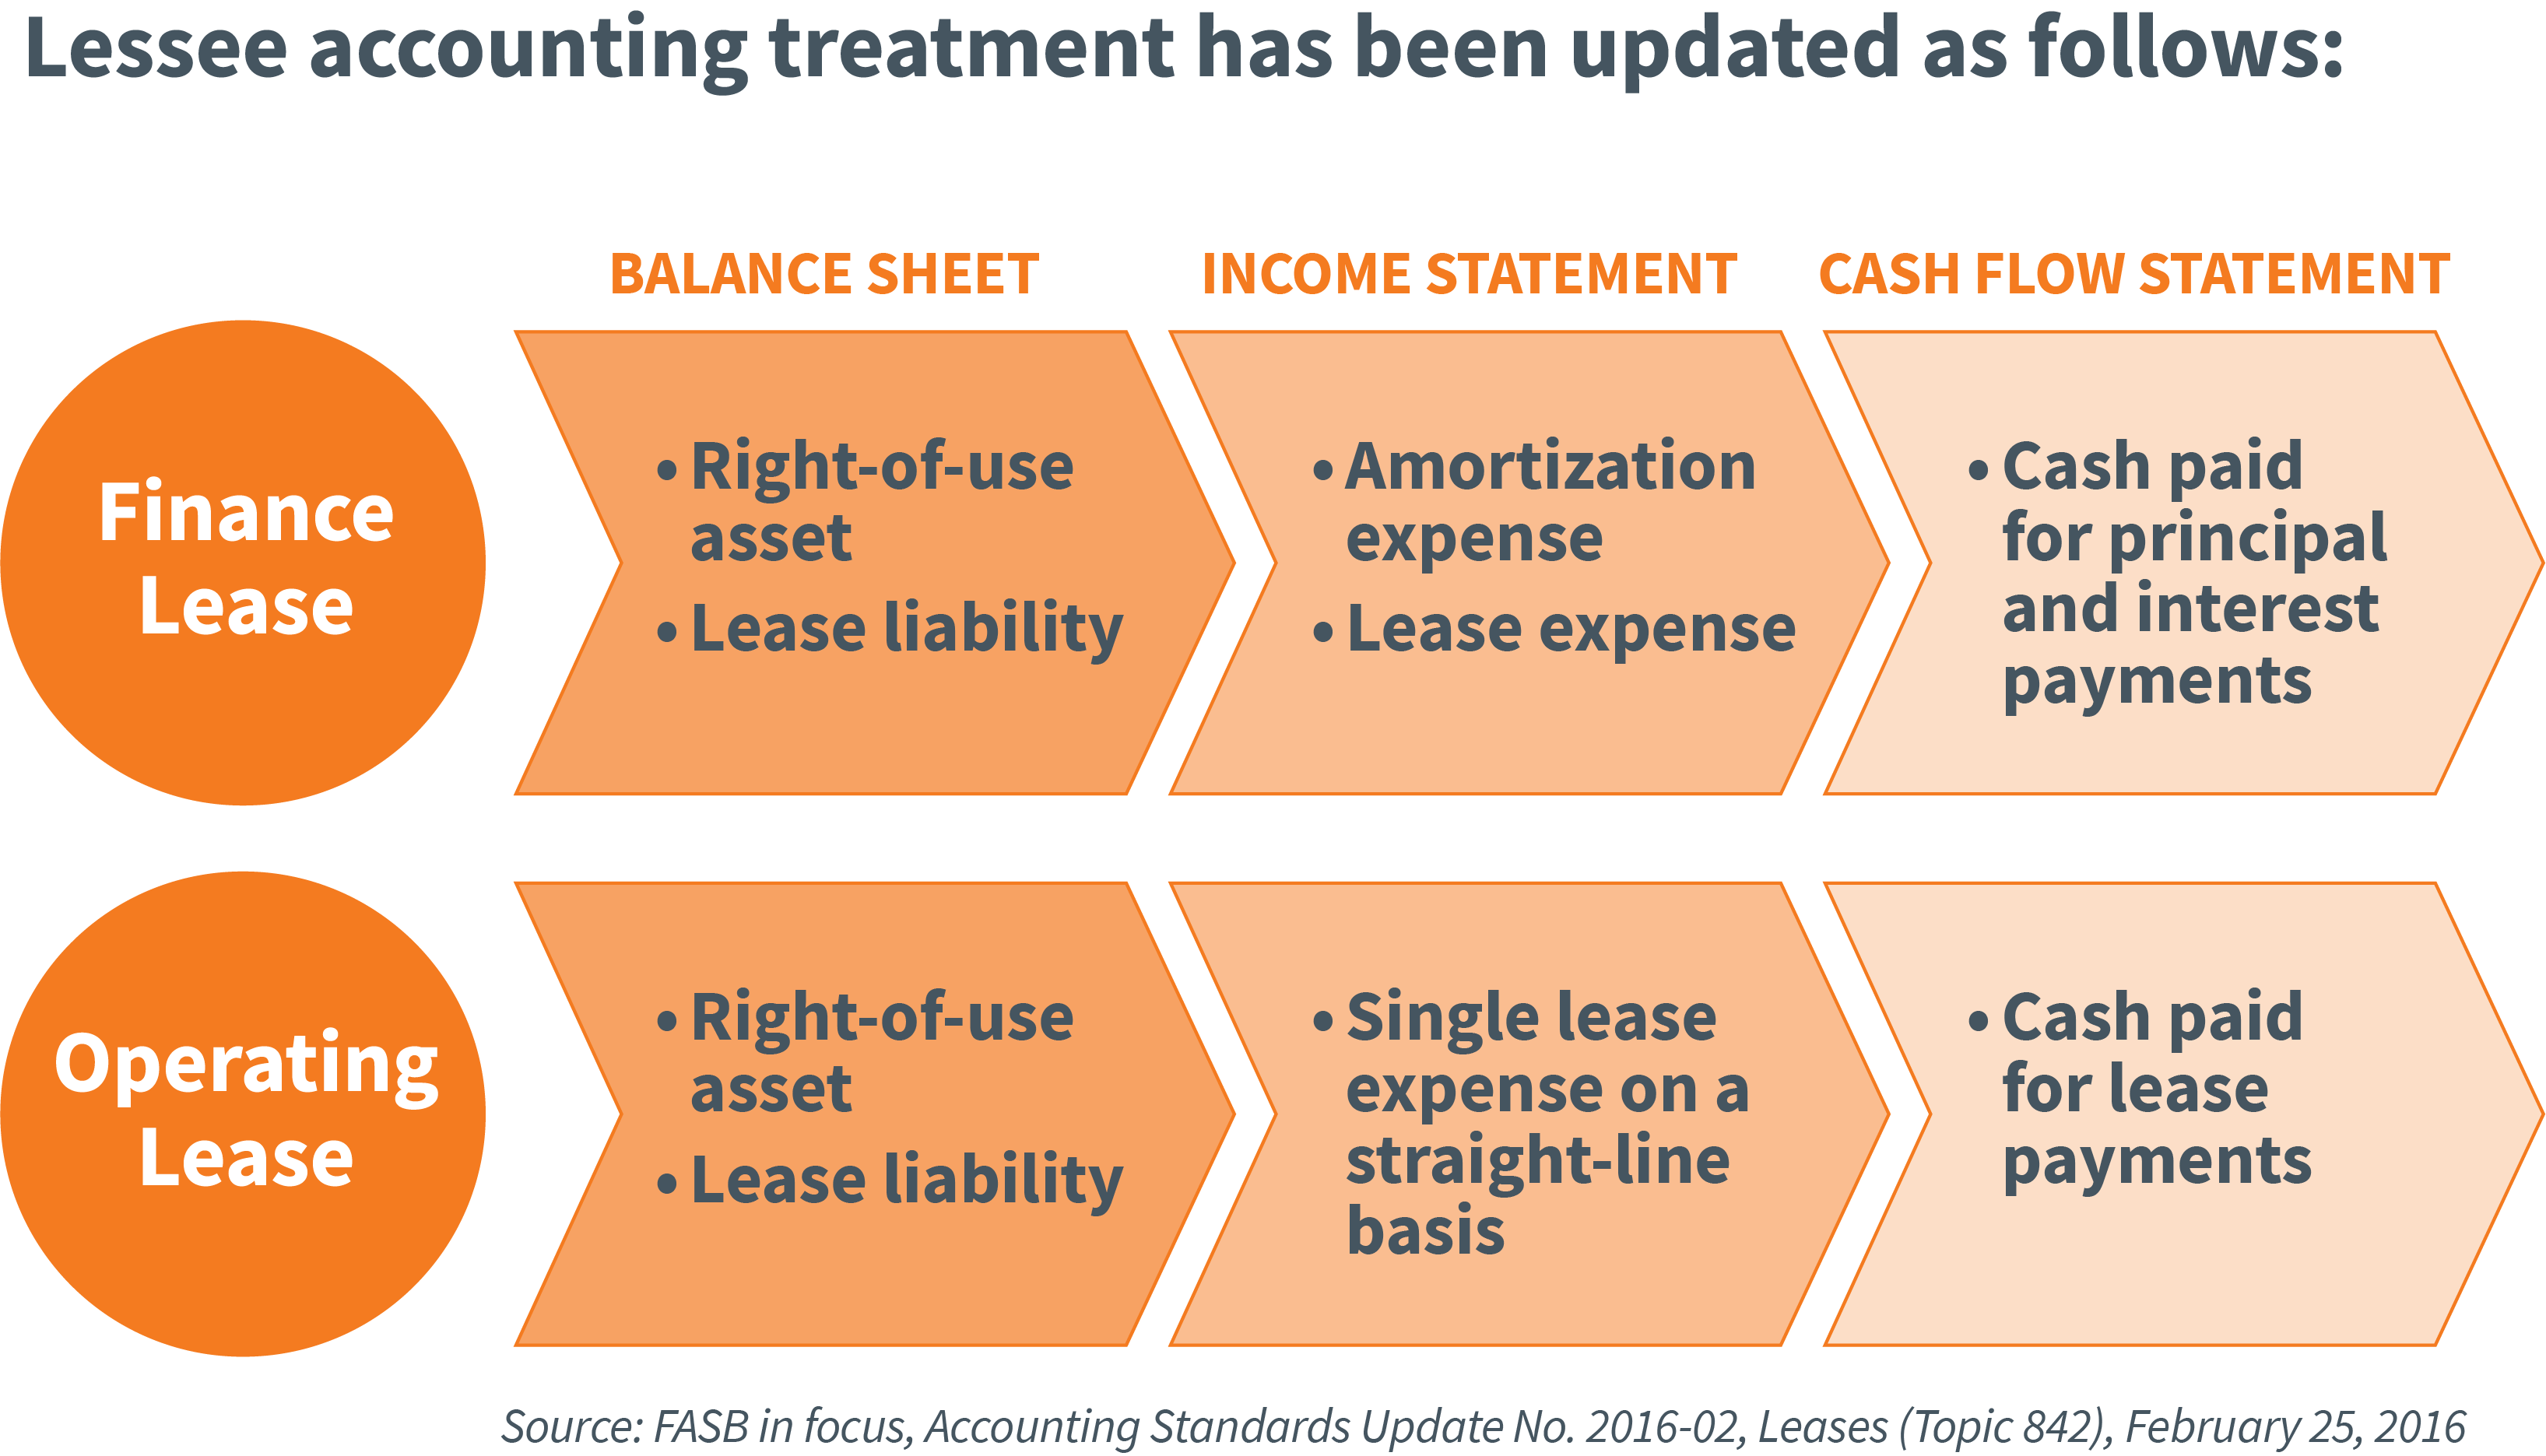 infographic showing Lessee accounting treatment update